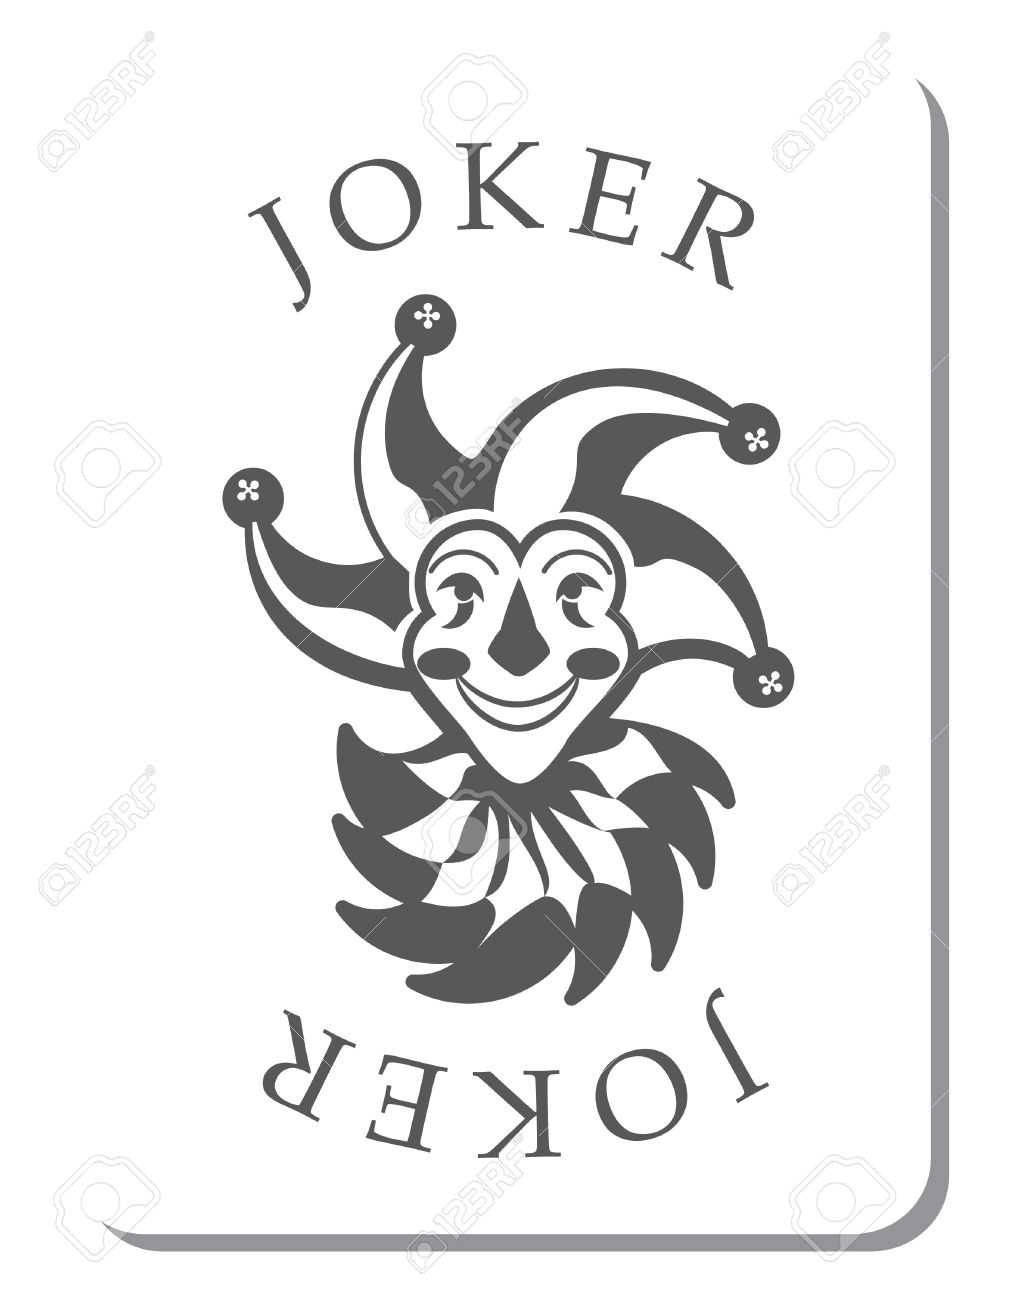 Playing Cards With The Joker From A Deck Of Playing Cards Inside Joker Card Template